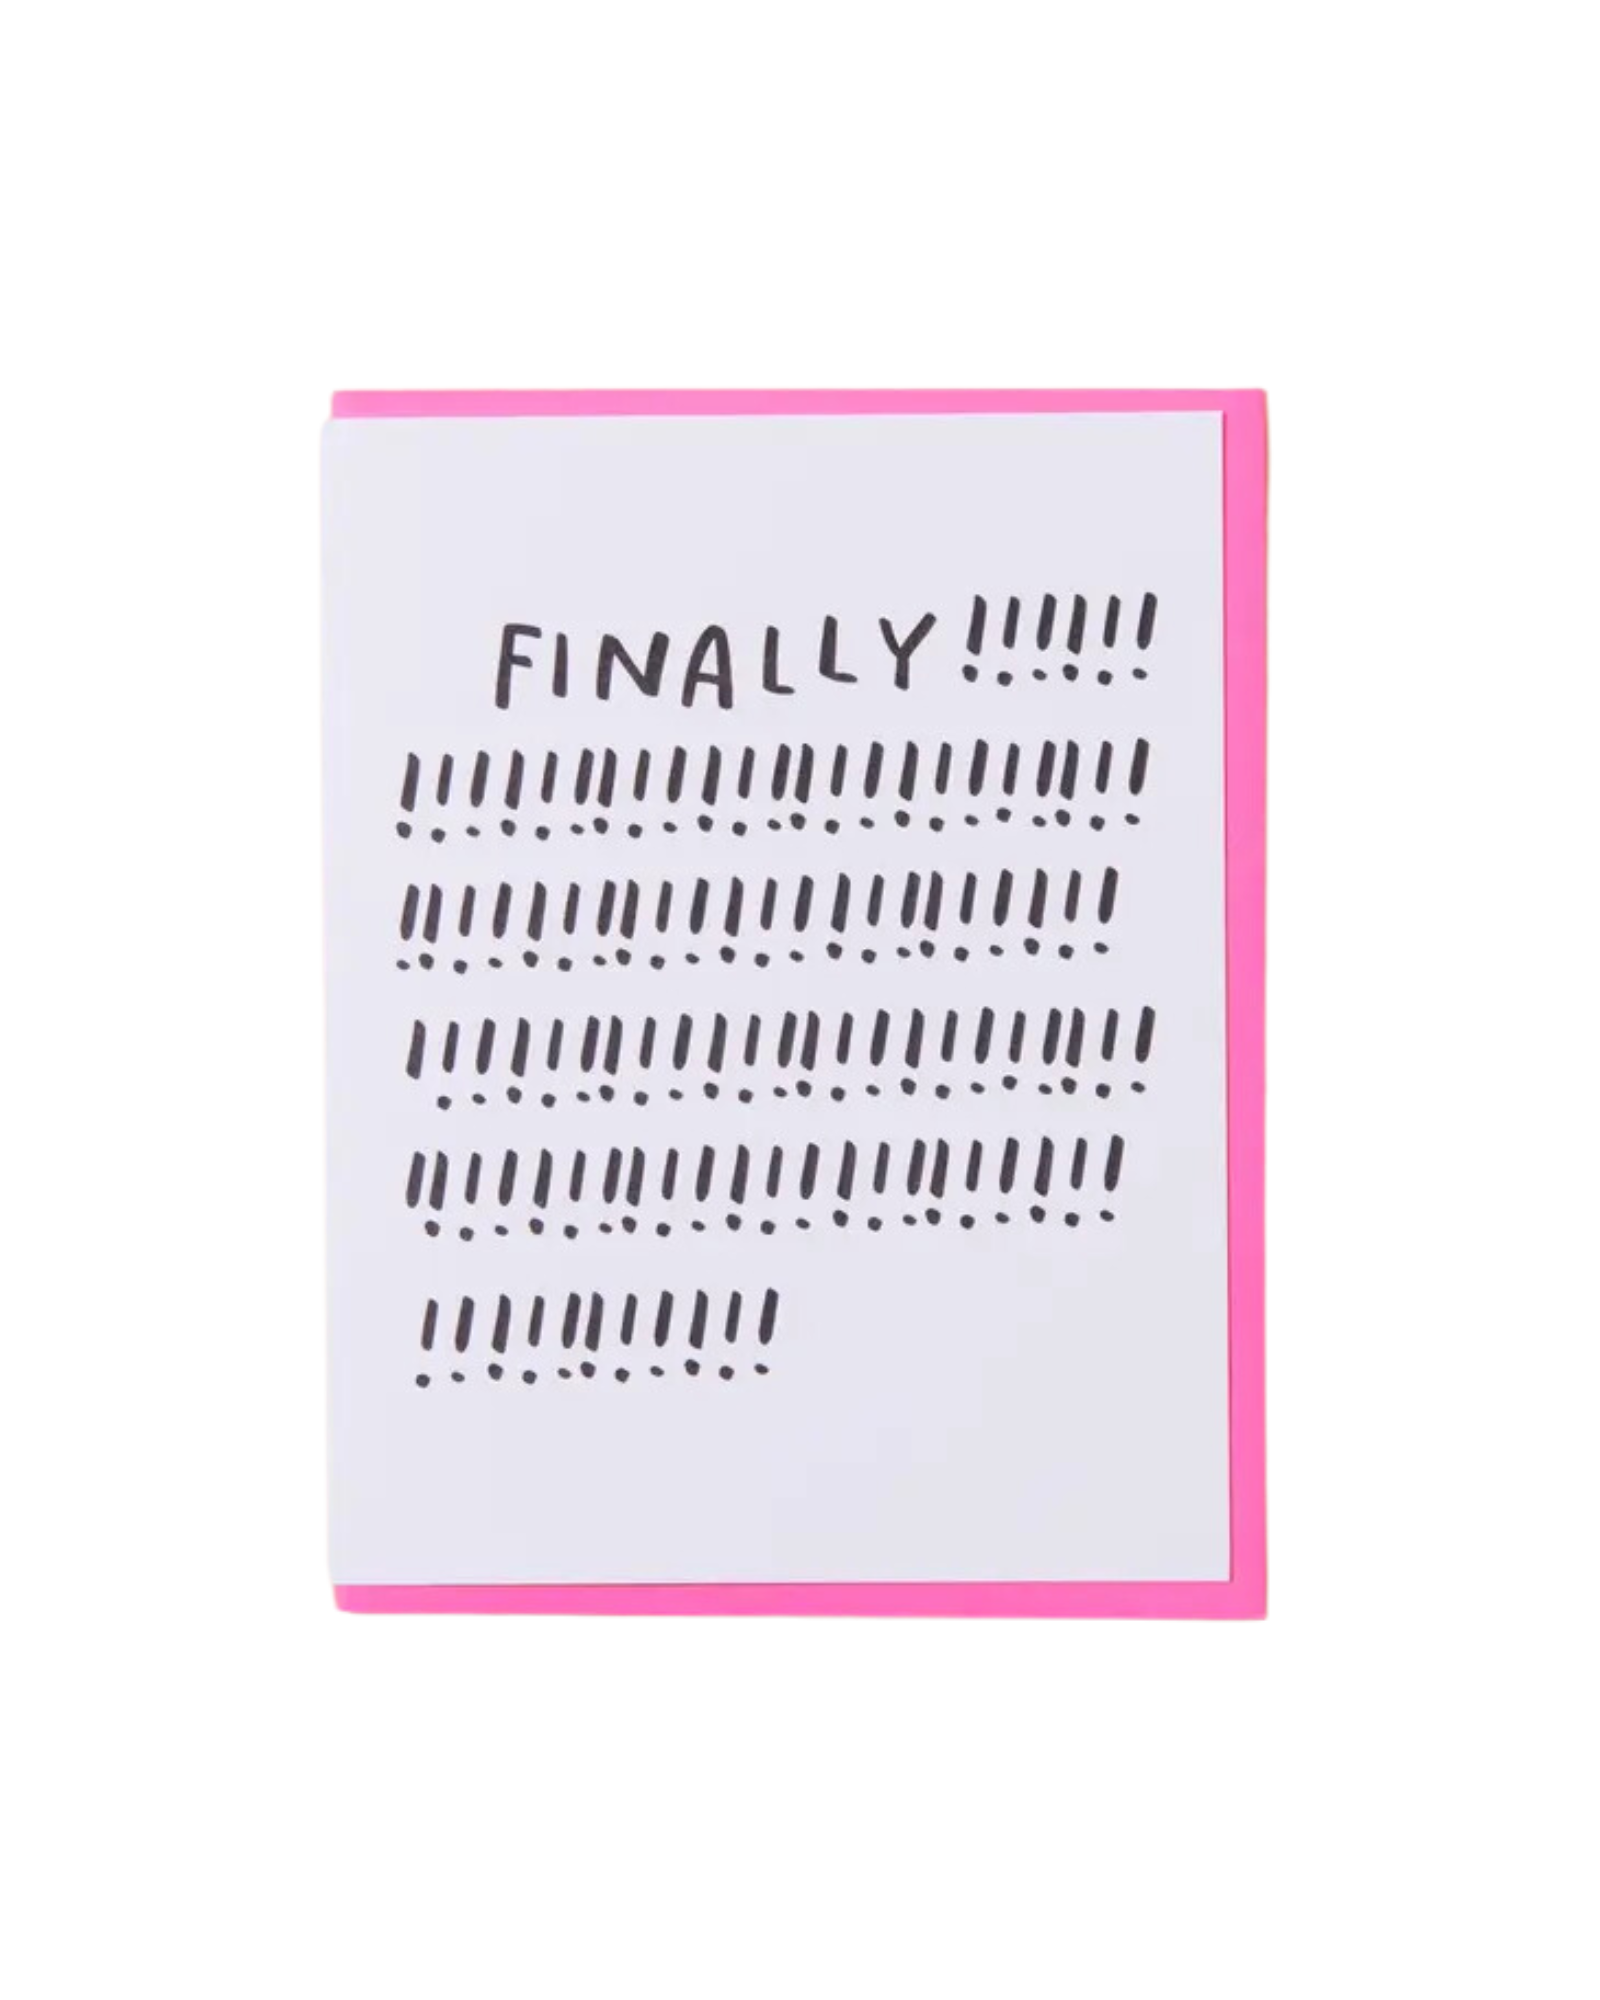 White card with pink envelope. Text on card says "finally!" with multiple exclamation marks. 